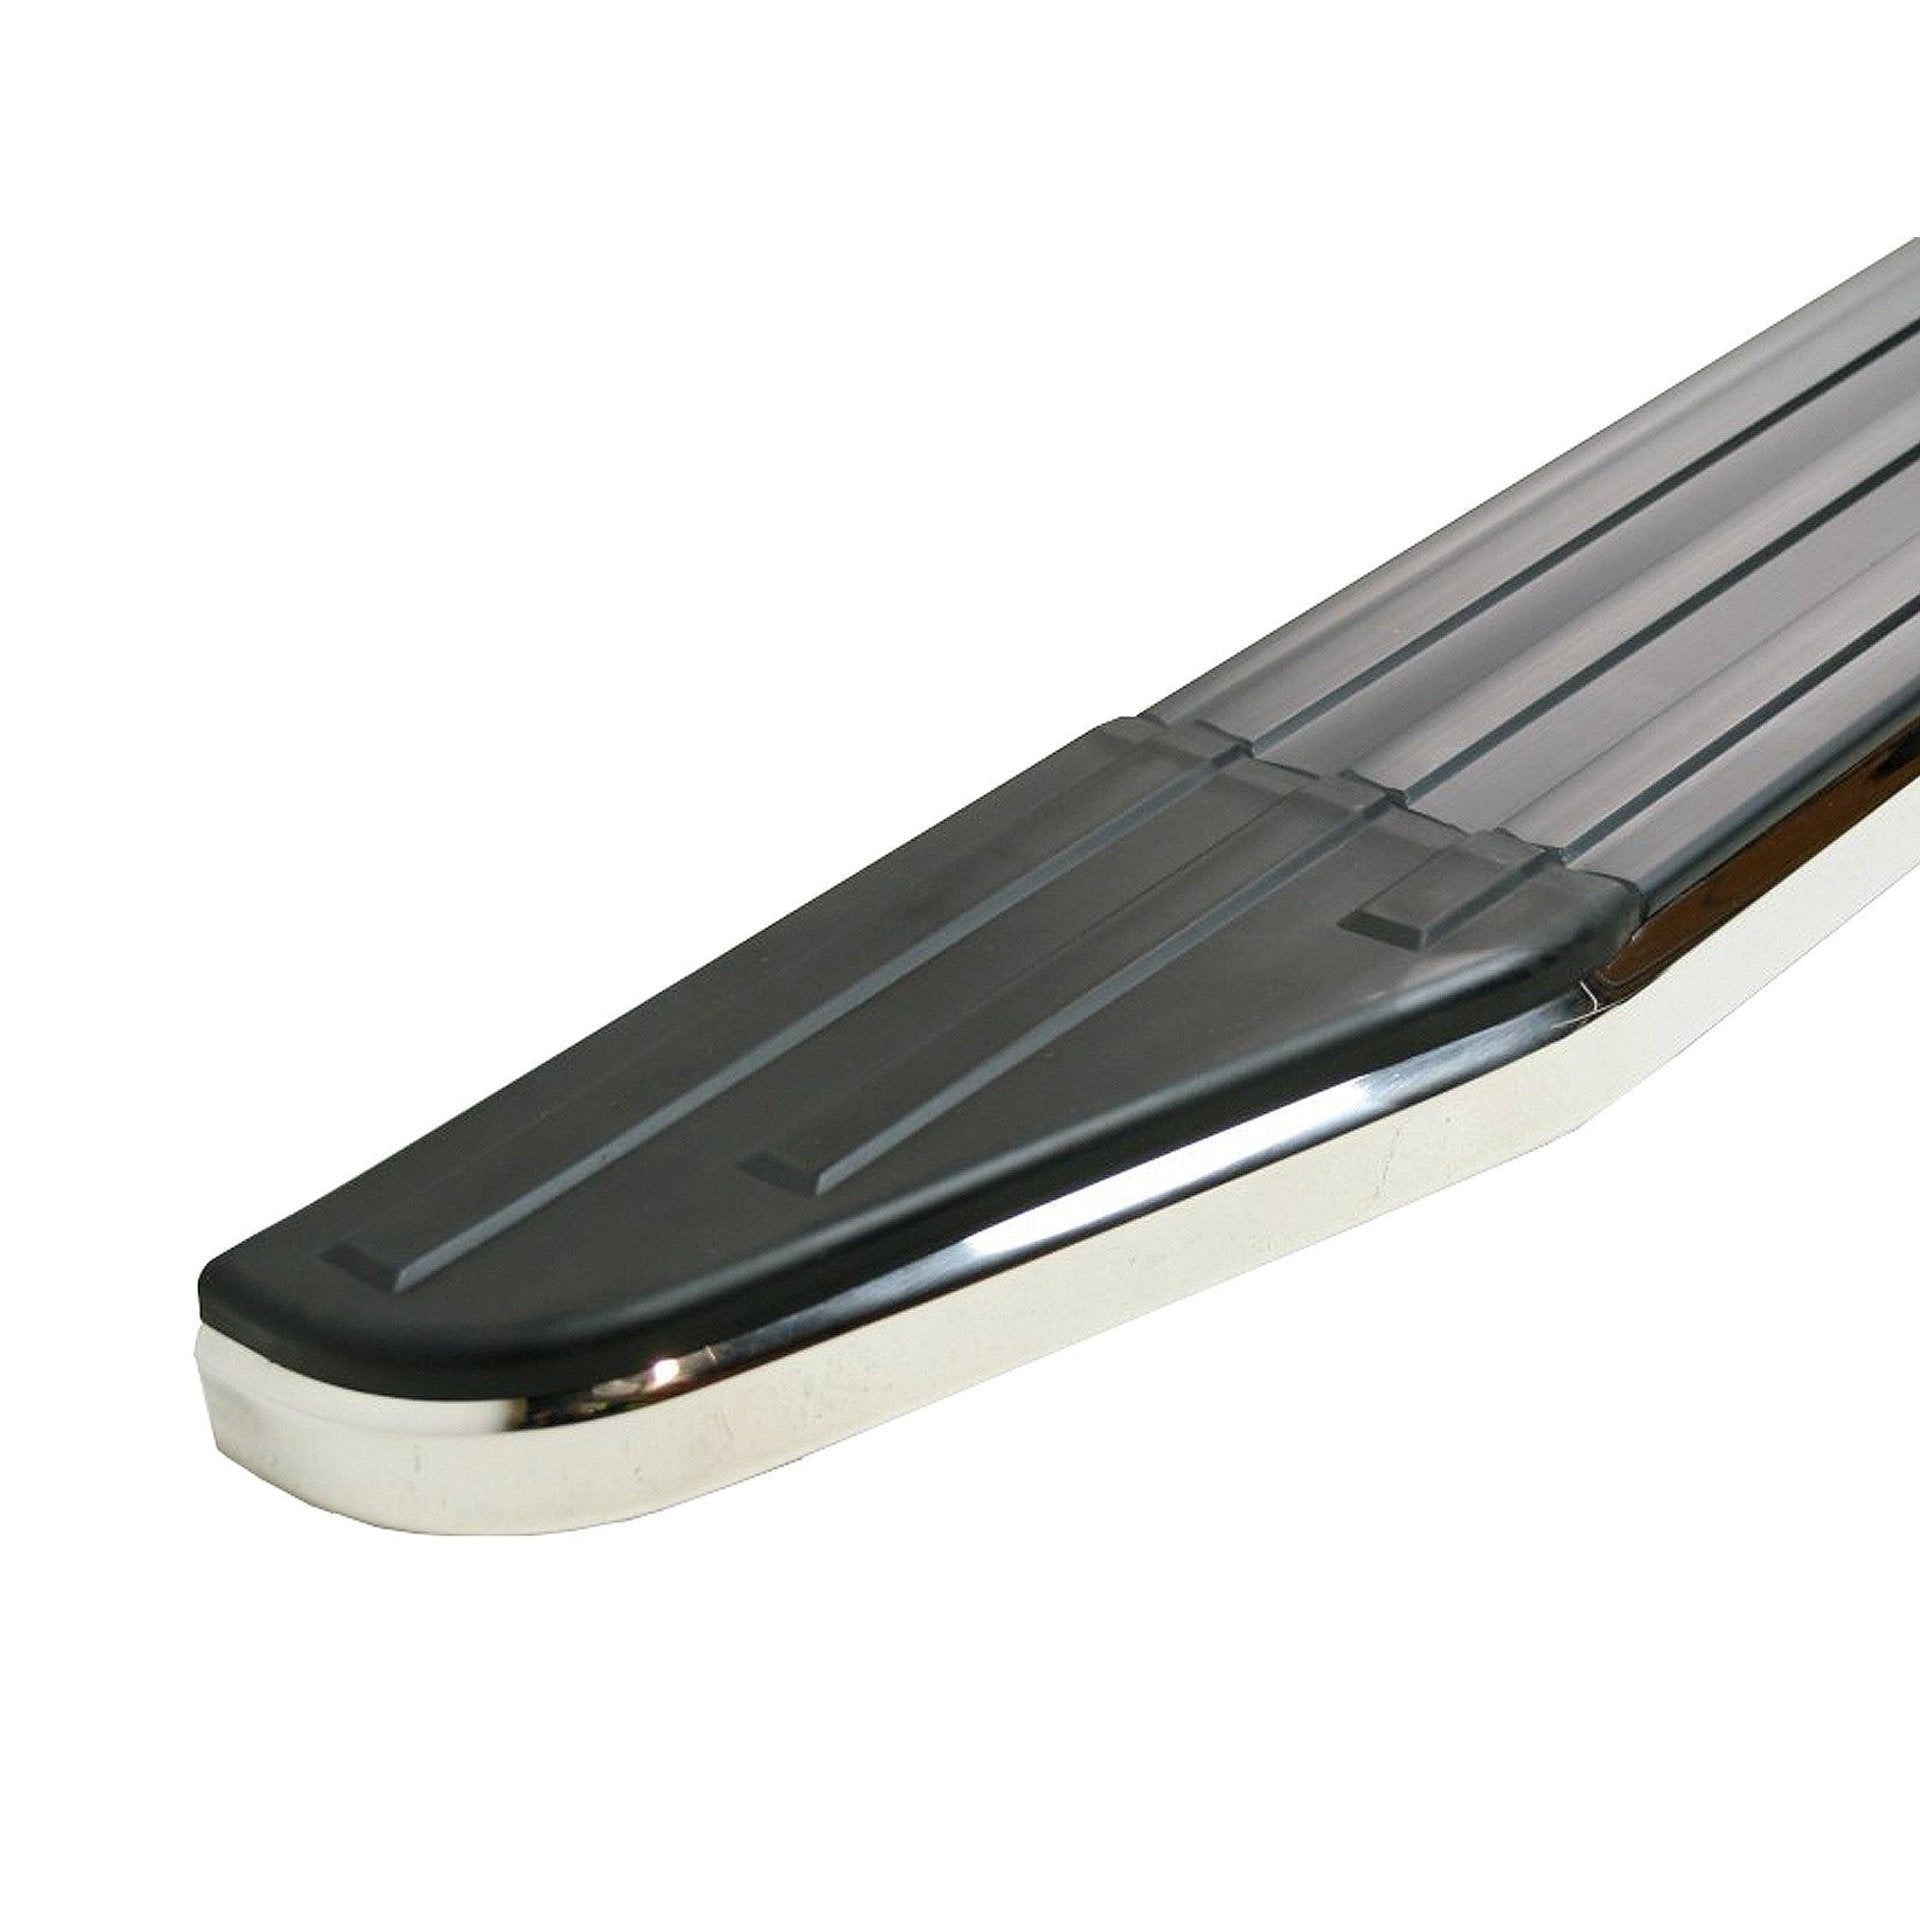 Raptor Side Steps Running Boards for Hyundai ix35 2010-2015 -  - sold by Direct4x4